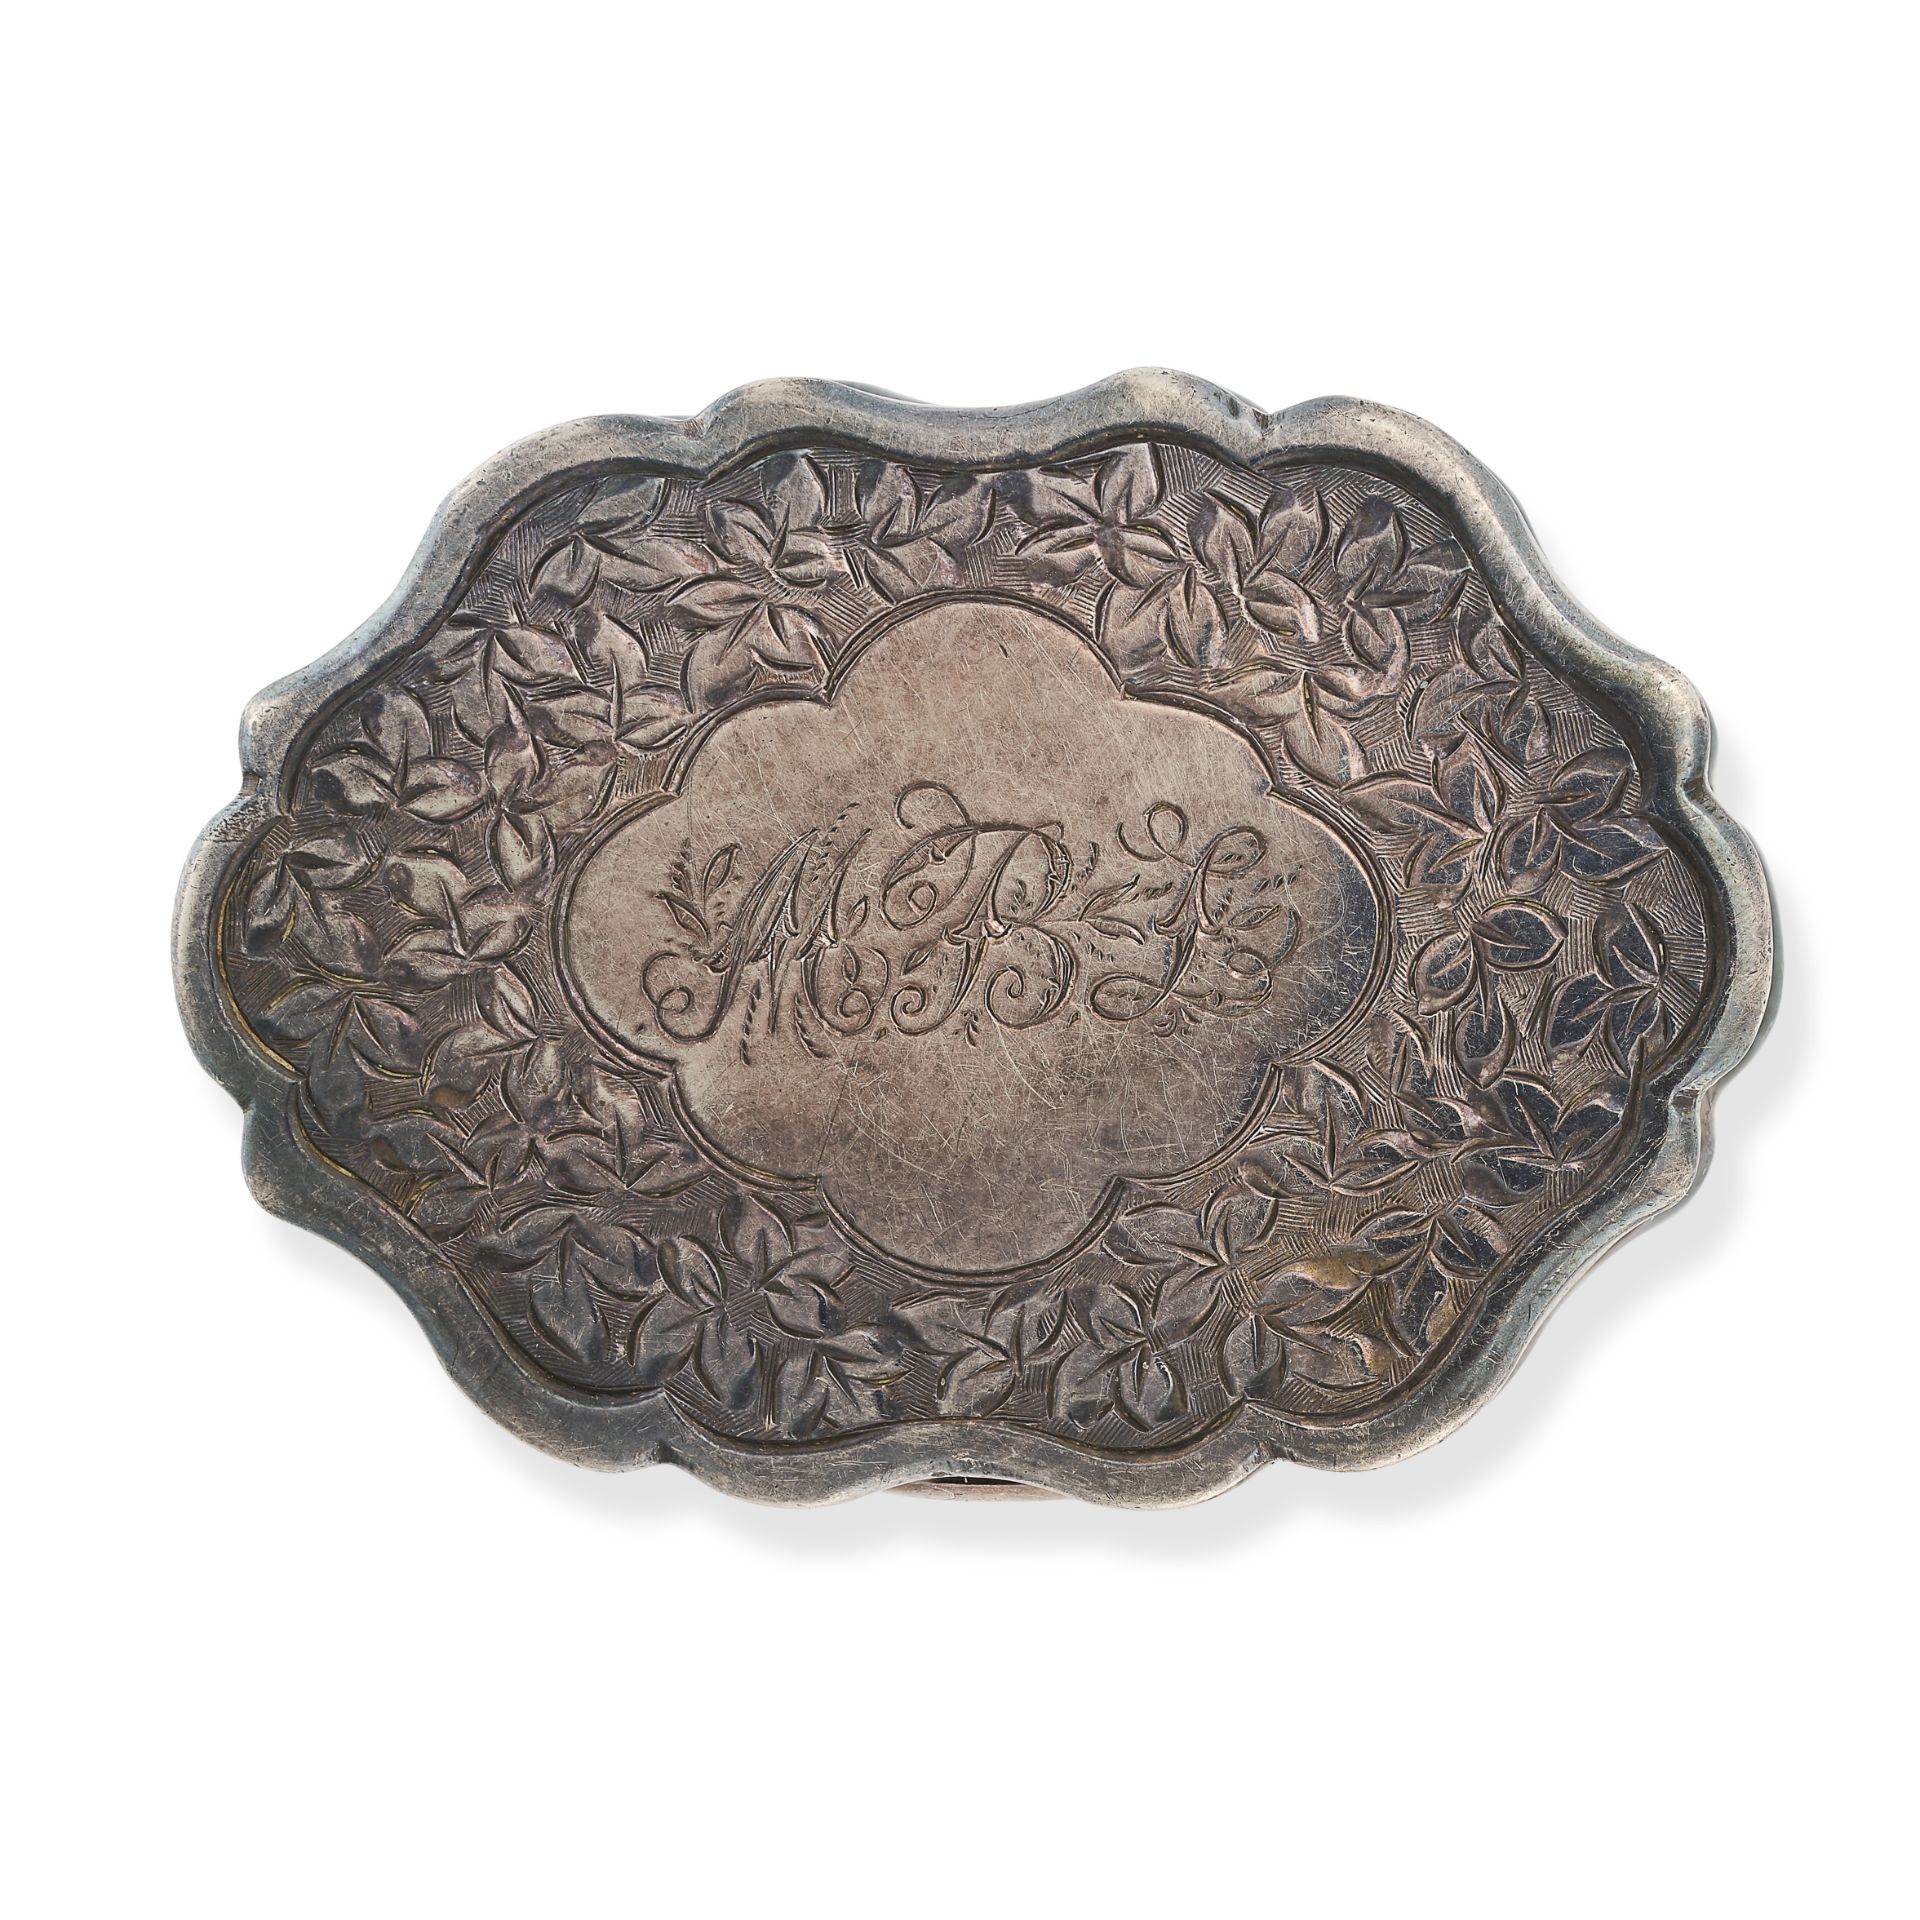 NO RESERVE - AN ANTIQUE VICTORIAN SILVER VINAIGRETTE engraved with an ivy leaf motif and the